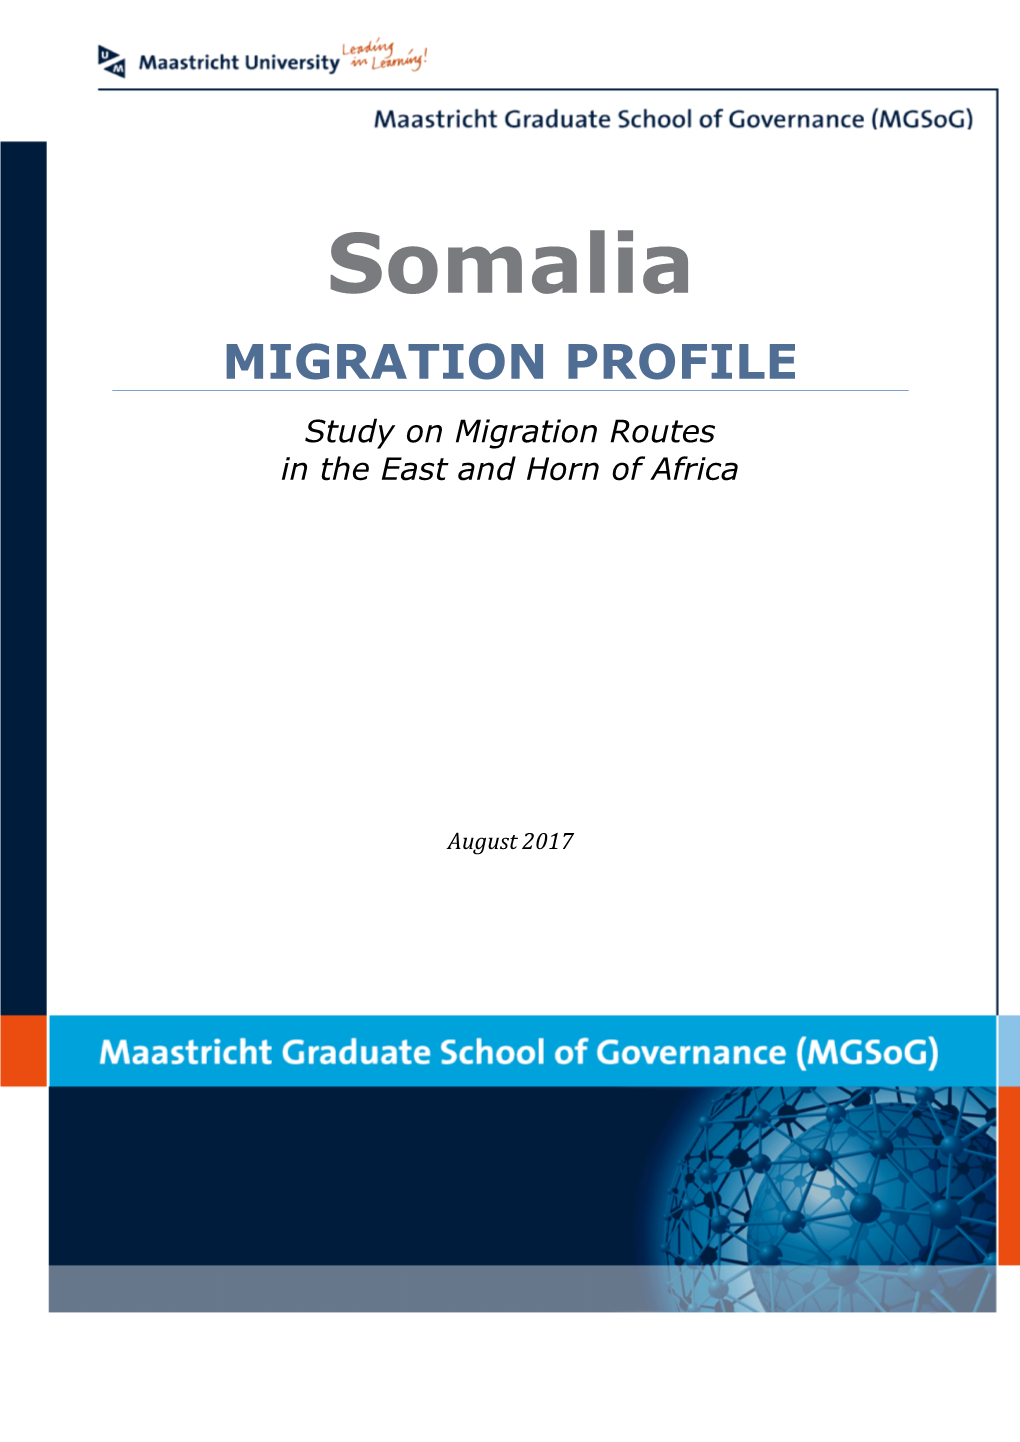 Somalia MIGRATION PROFILE Study on Migration Routes in the East and Horn of Africa